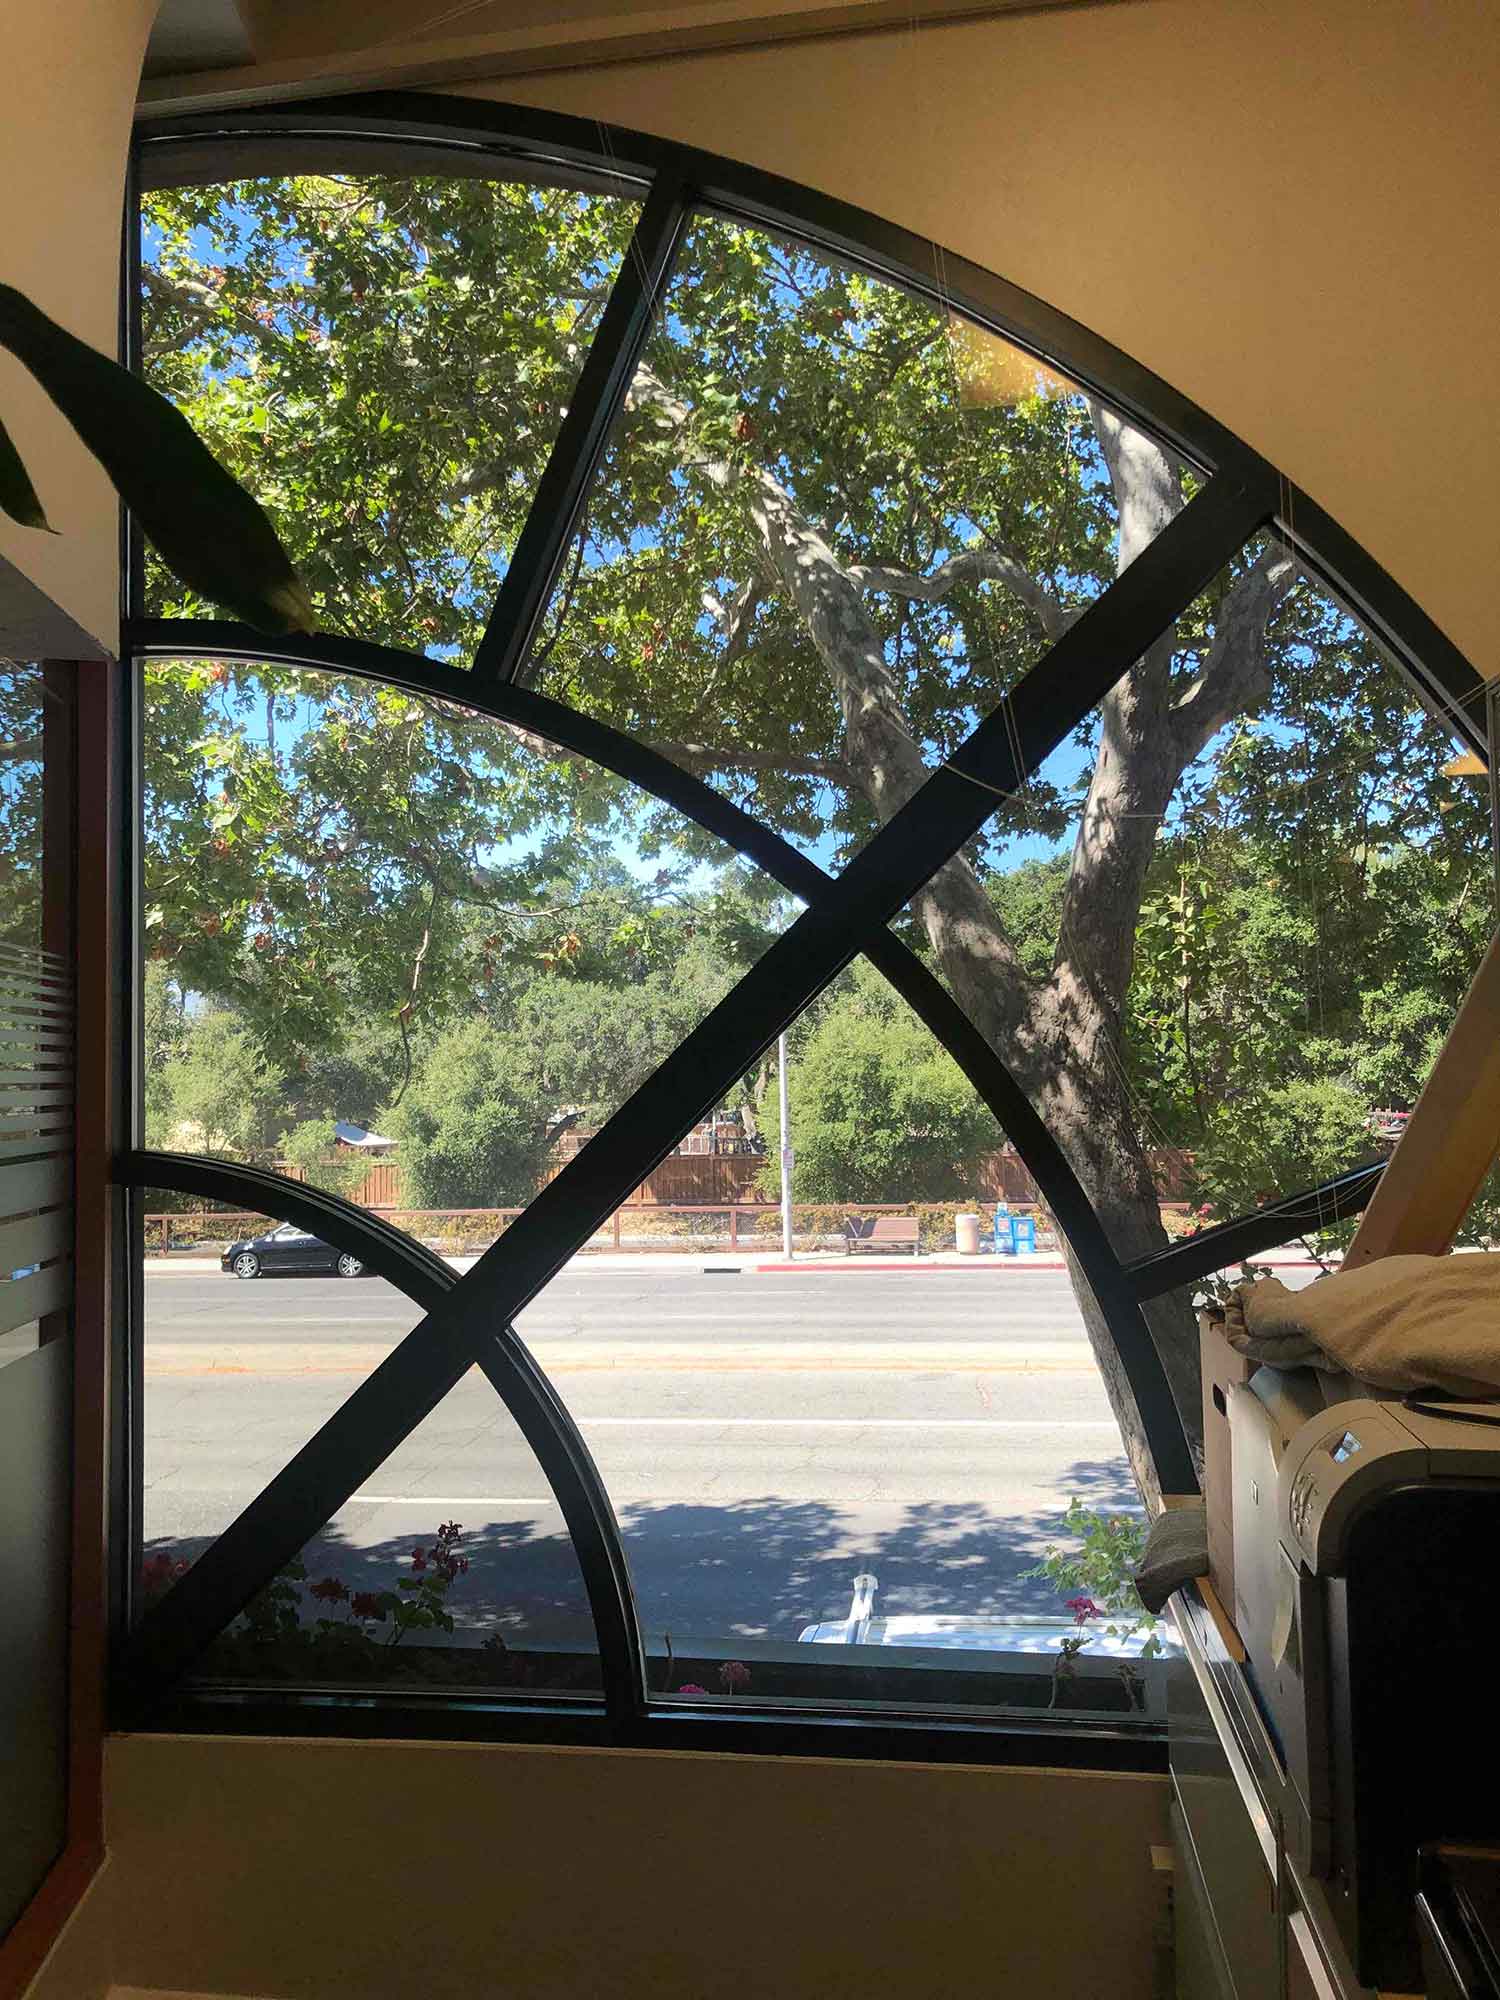 Sun Control Window Tint installed at a Palo Alto office by ClimatePro.